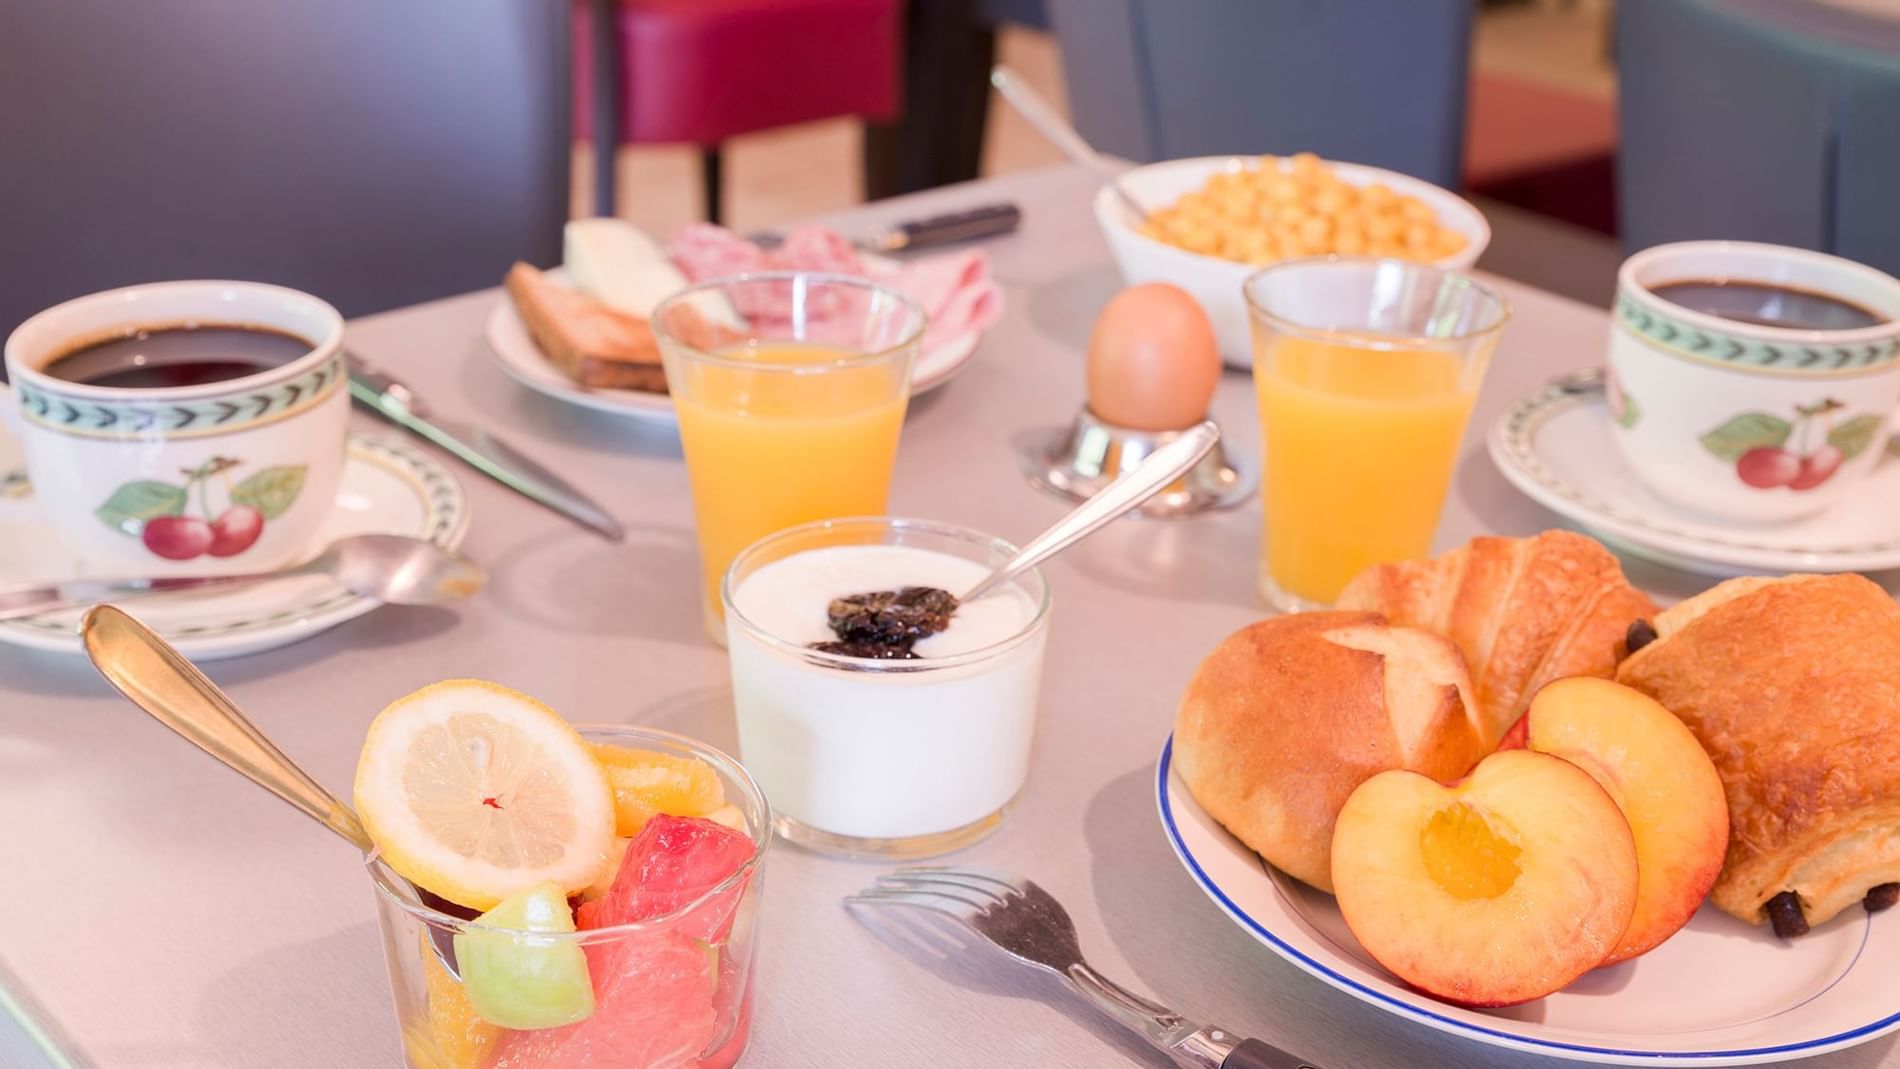 A breakfast meal served at The Originals Hotels